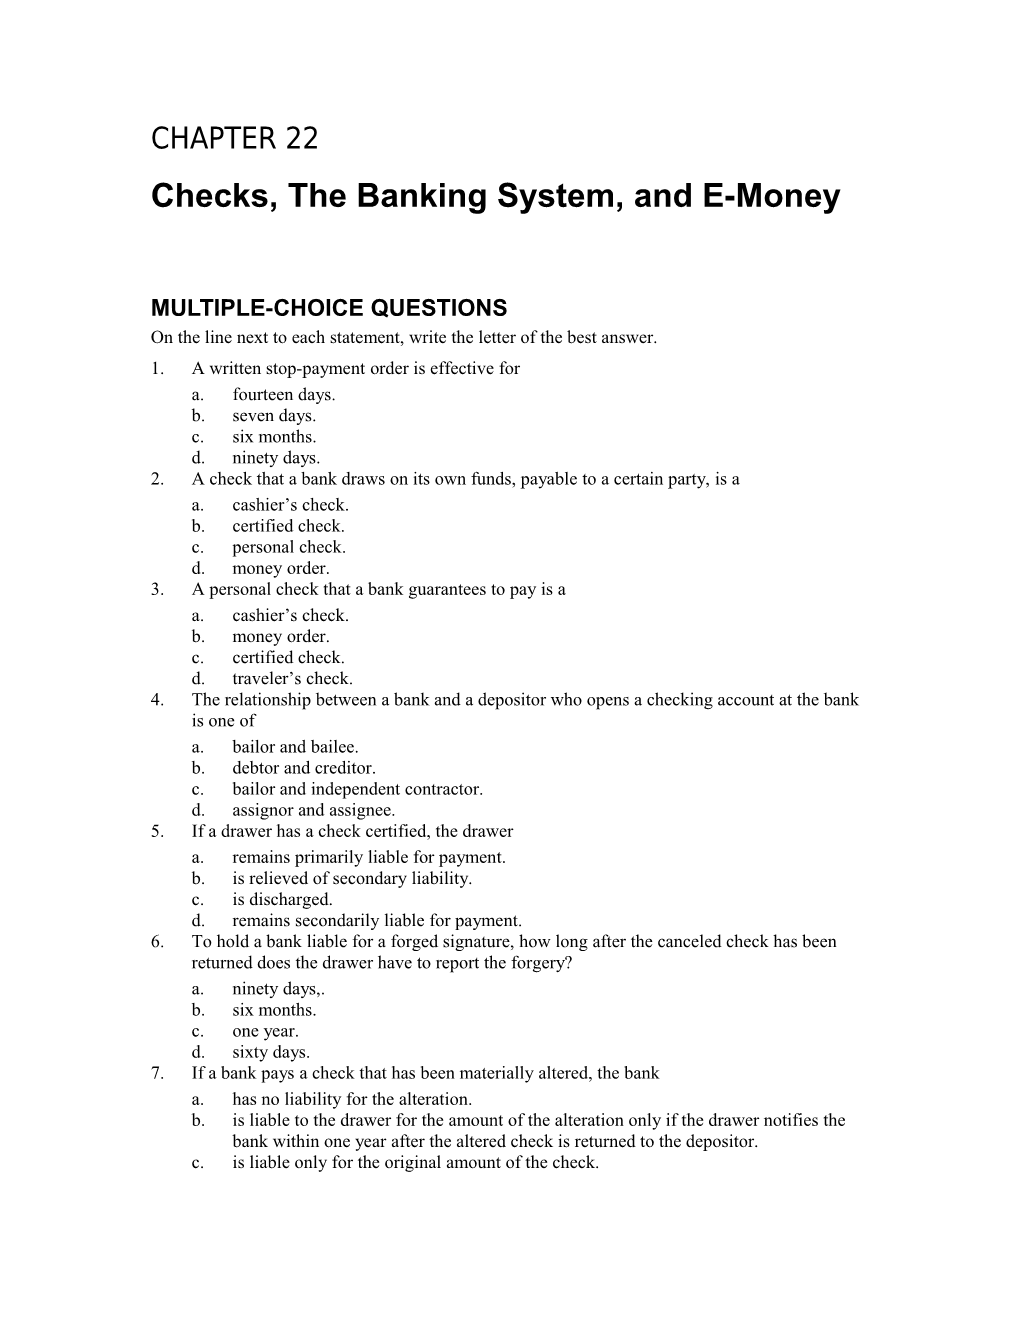 Checks, the Banking System, and E-Money